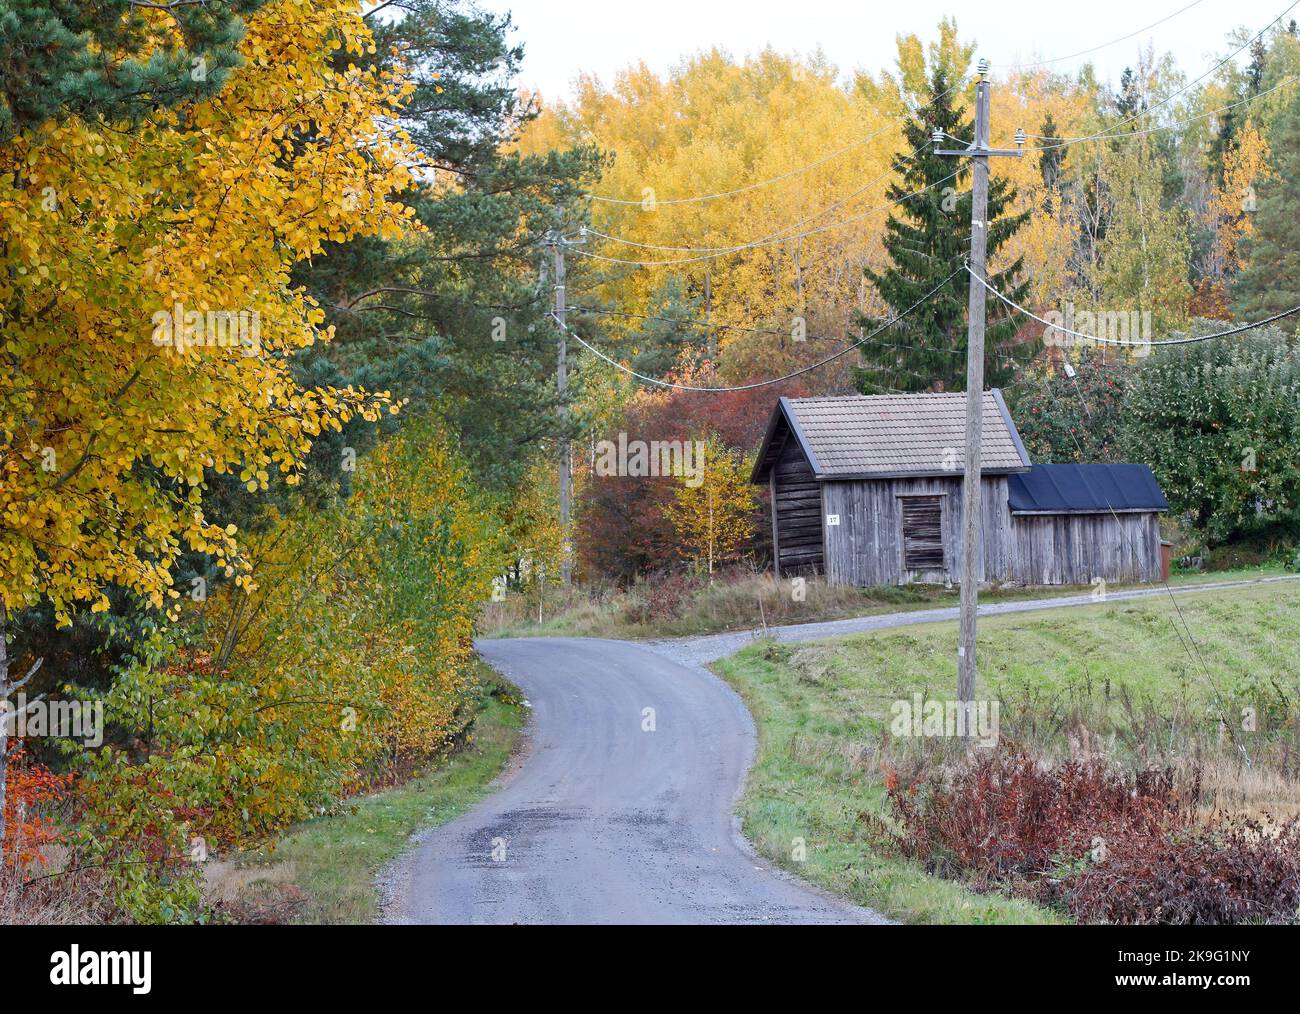 Small countryroad through autumnal landscape Stock Photo